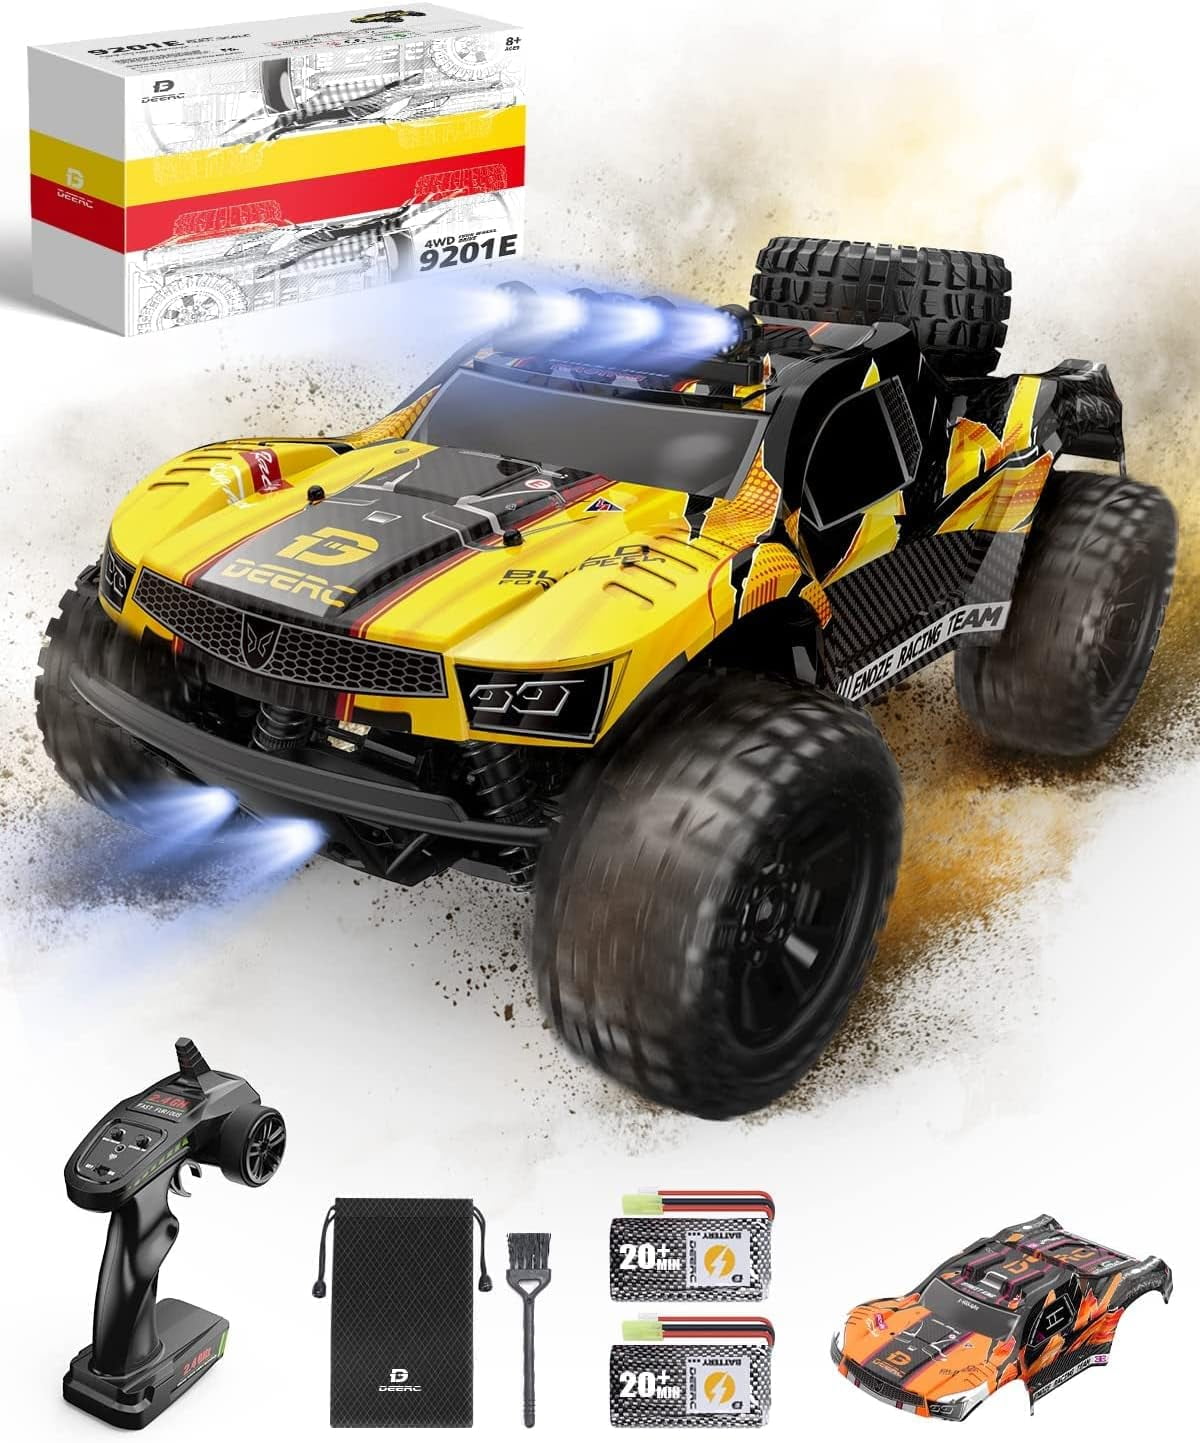 DEERC 1:10 Large Scale RC Car 4WD 50KM/H High Speed Remote Control Car with  Lights for Kids Adults,Off-Road Monster Crawler Truck Toy for Boys with 2